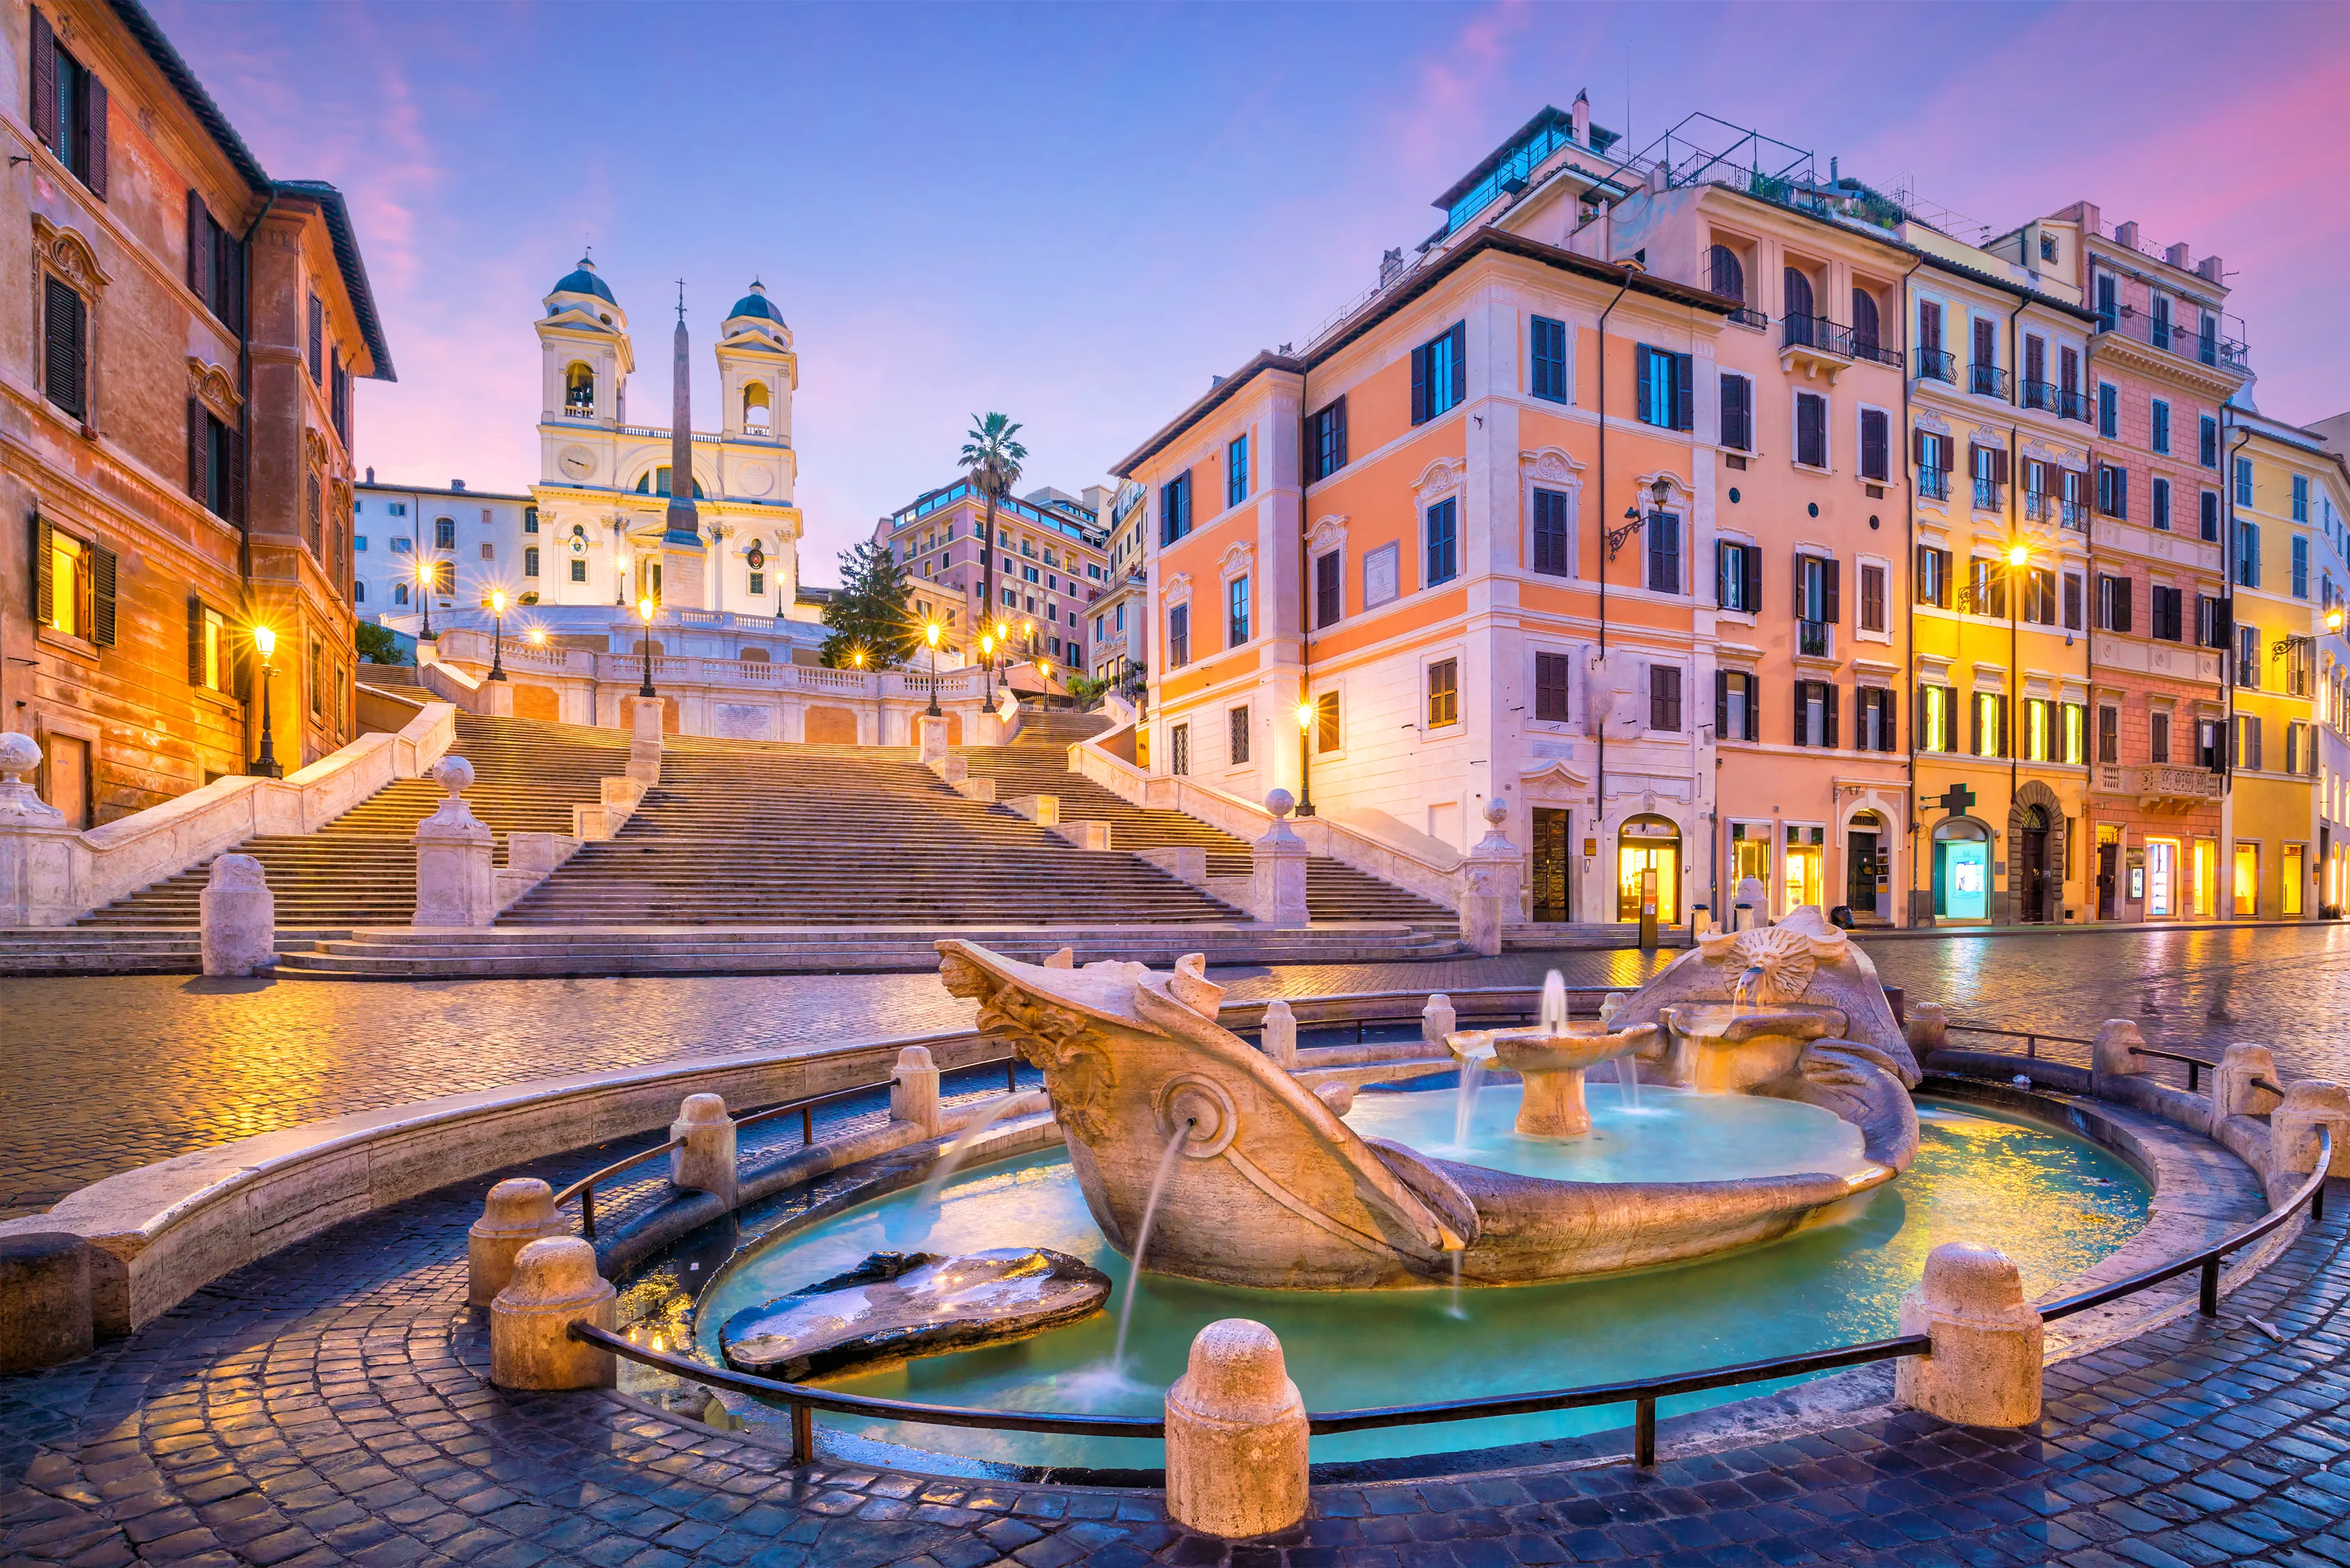 1-Day Adventure, Sightseeing & Nightlife Tour in Rome Italy